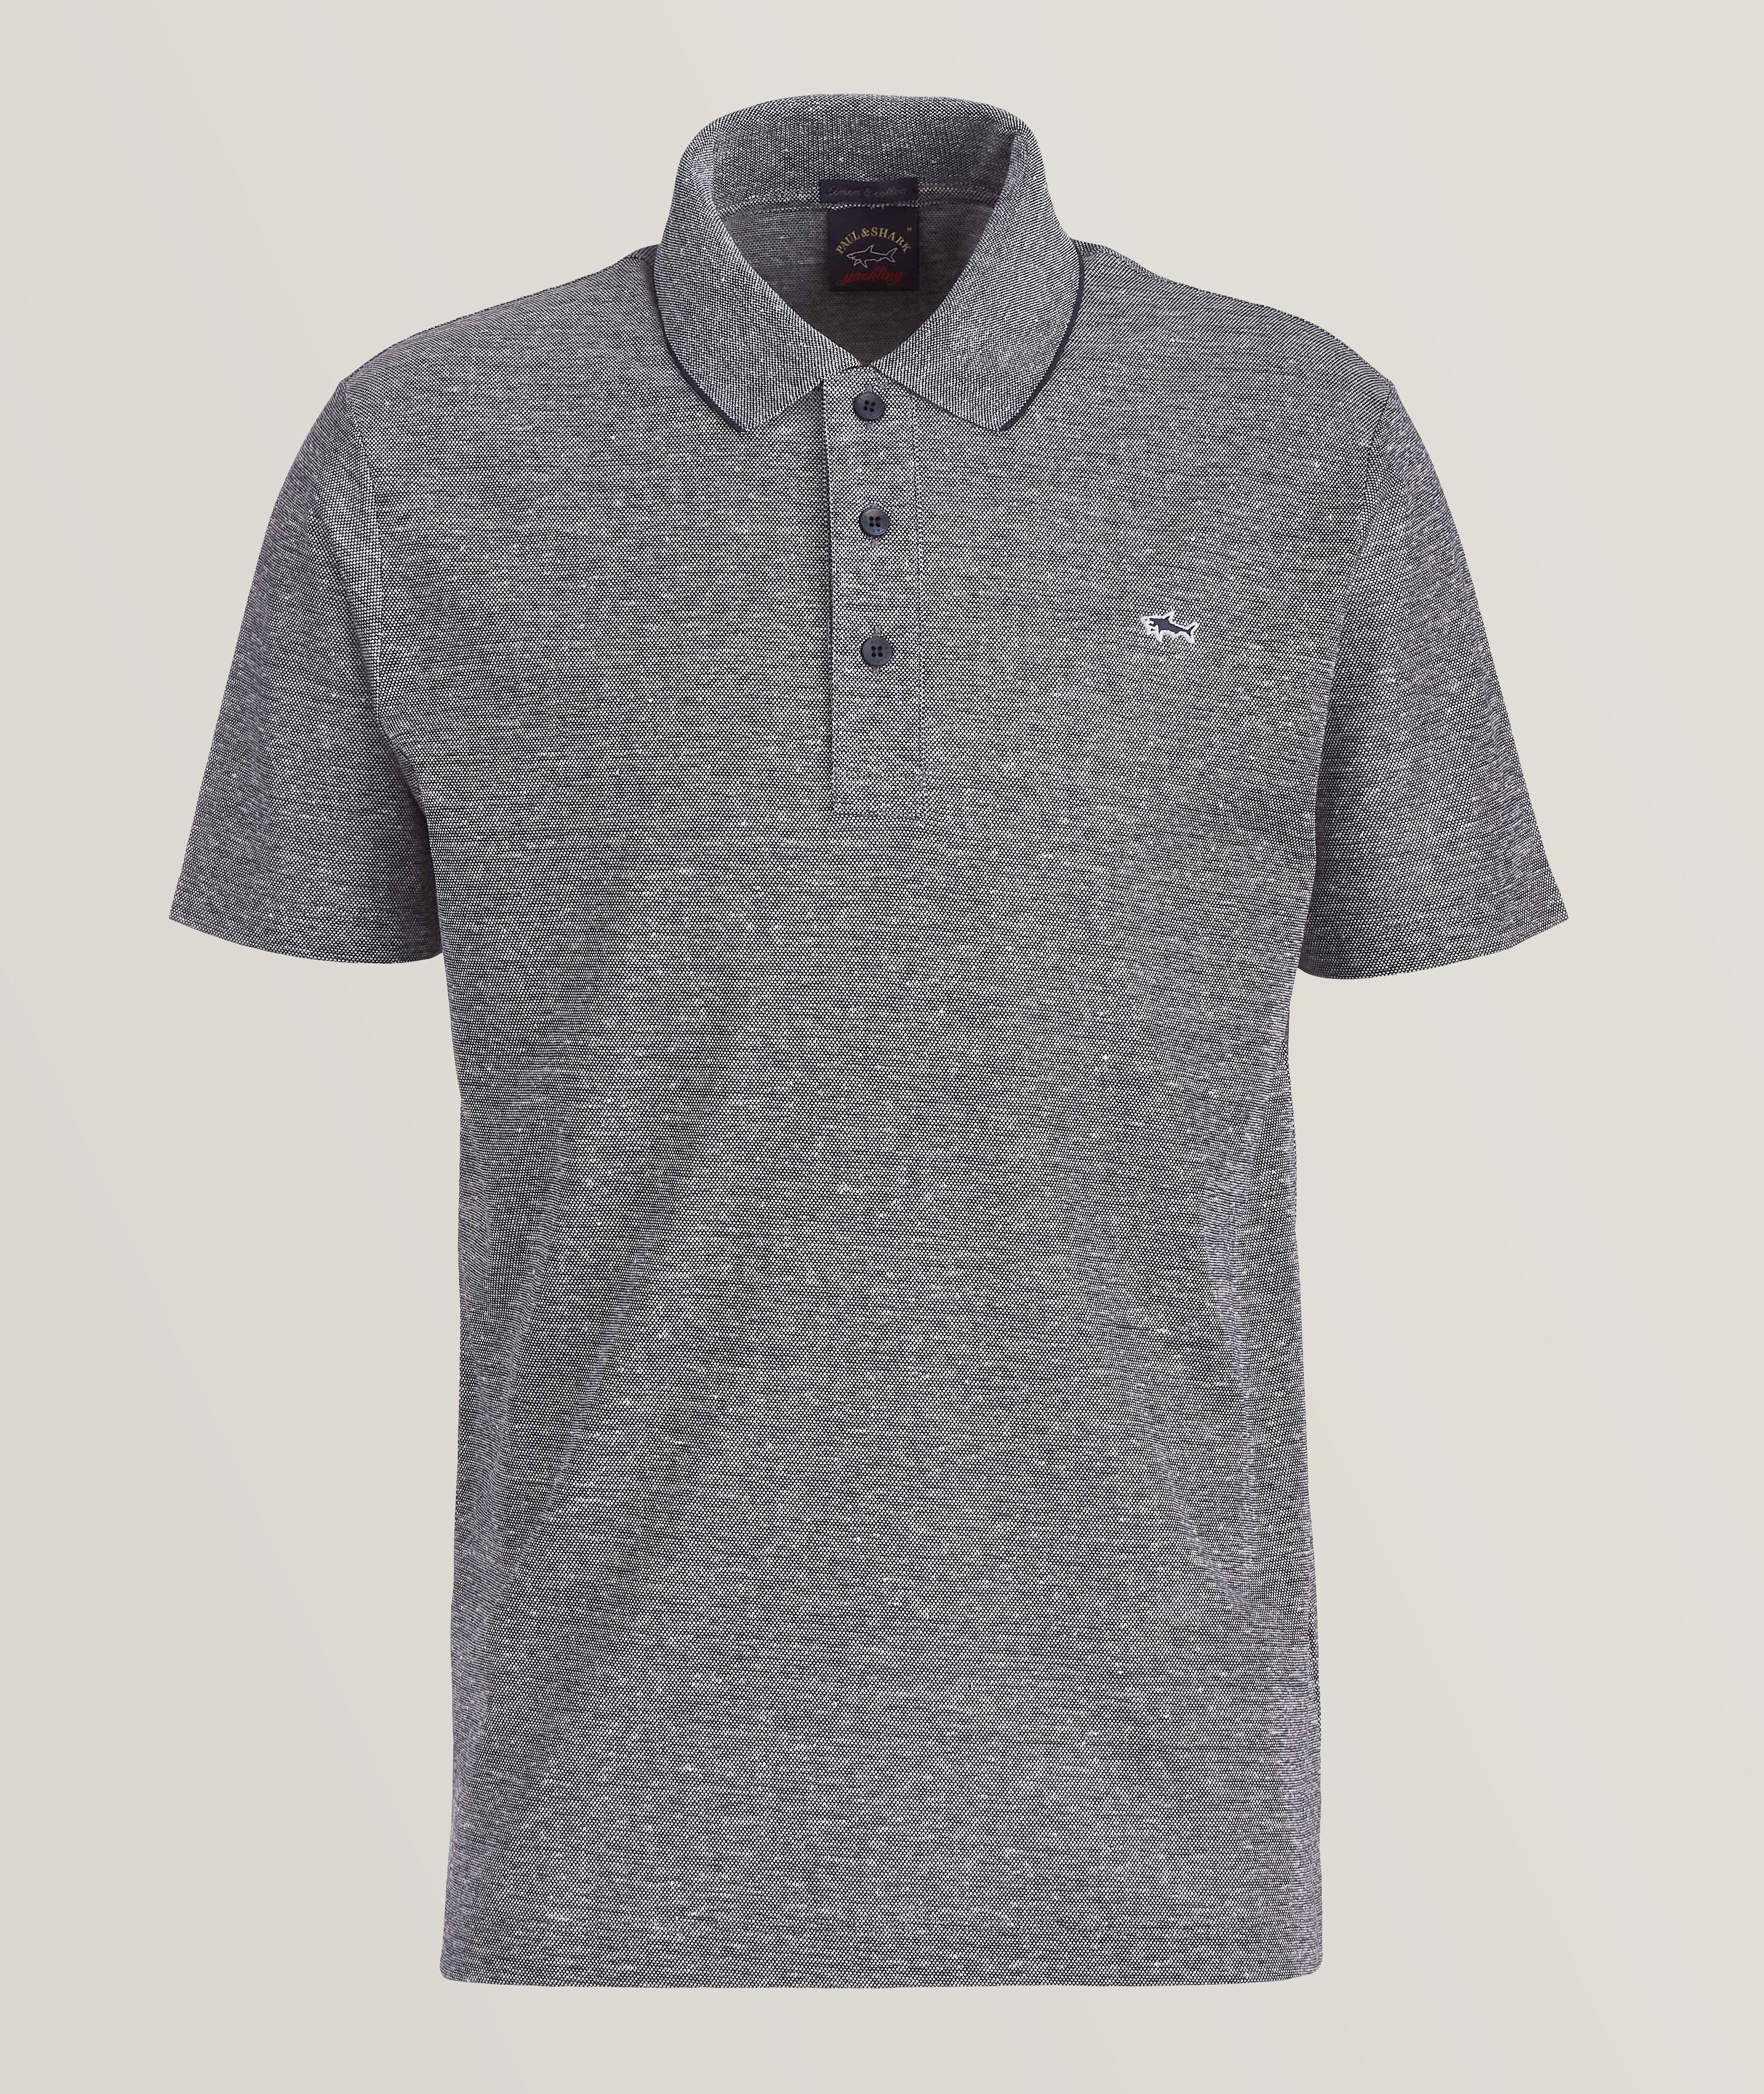 Contrast Tipped Linen-Cotton Polo image 0